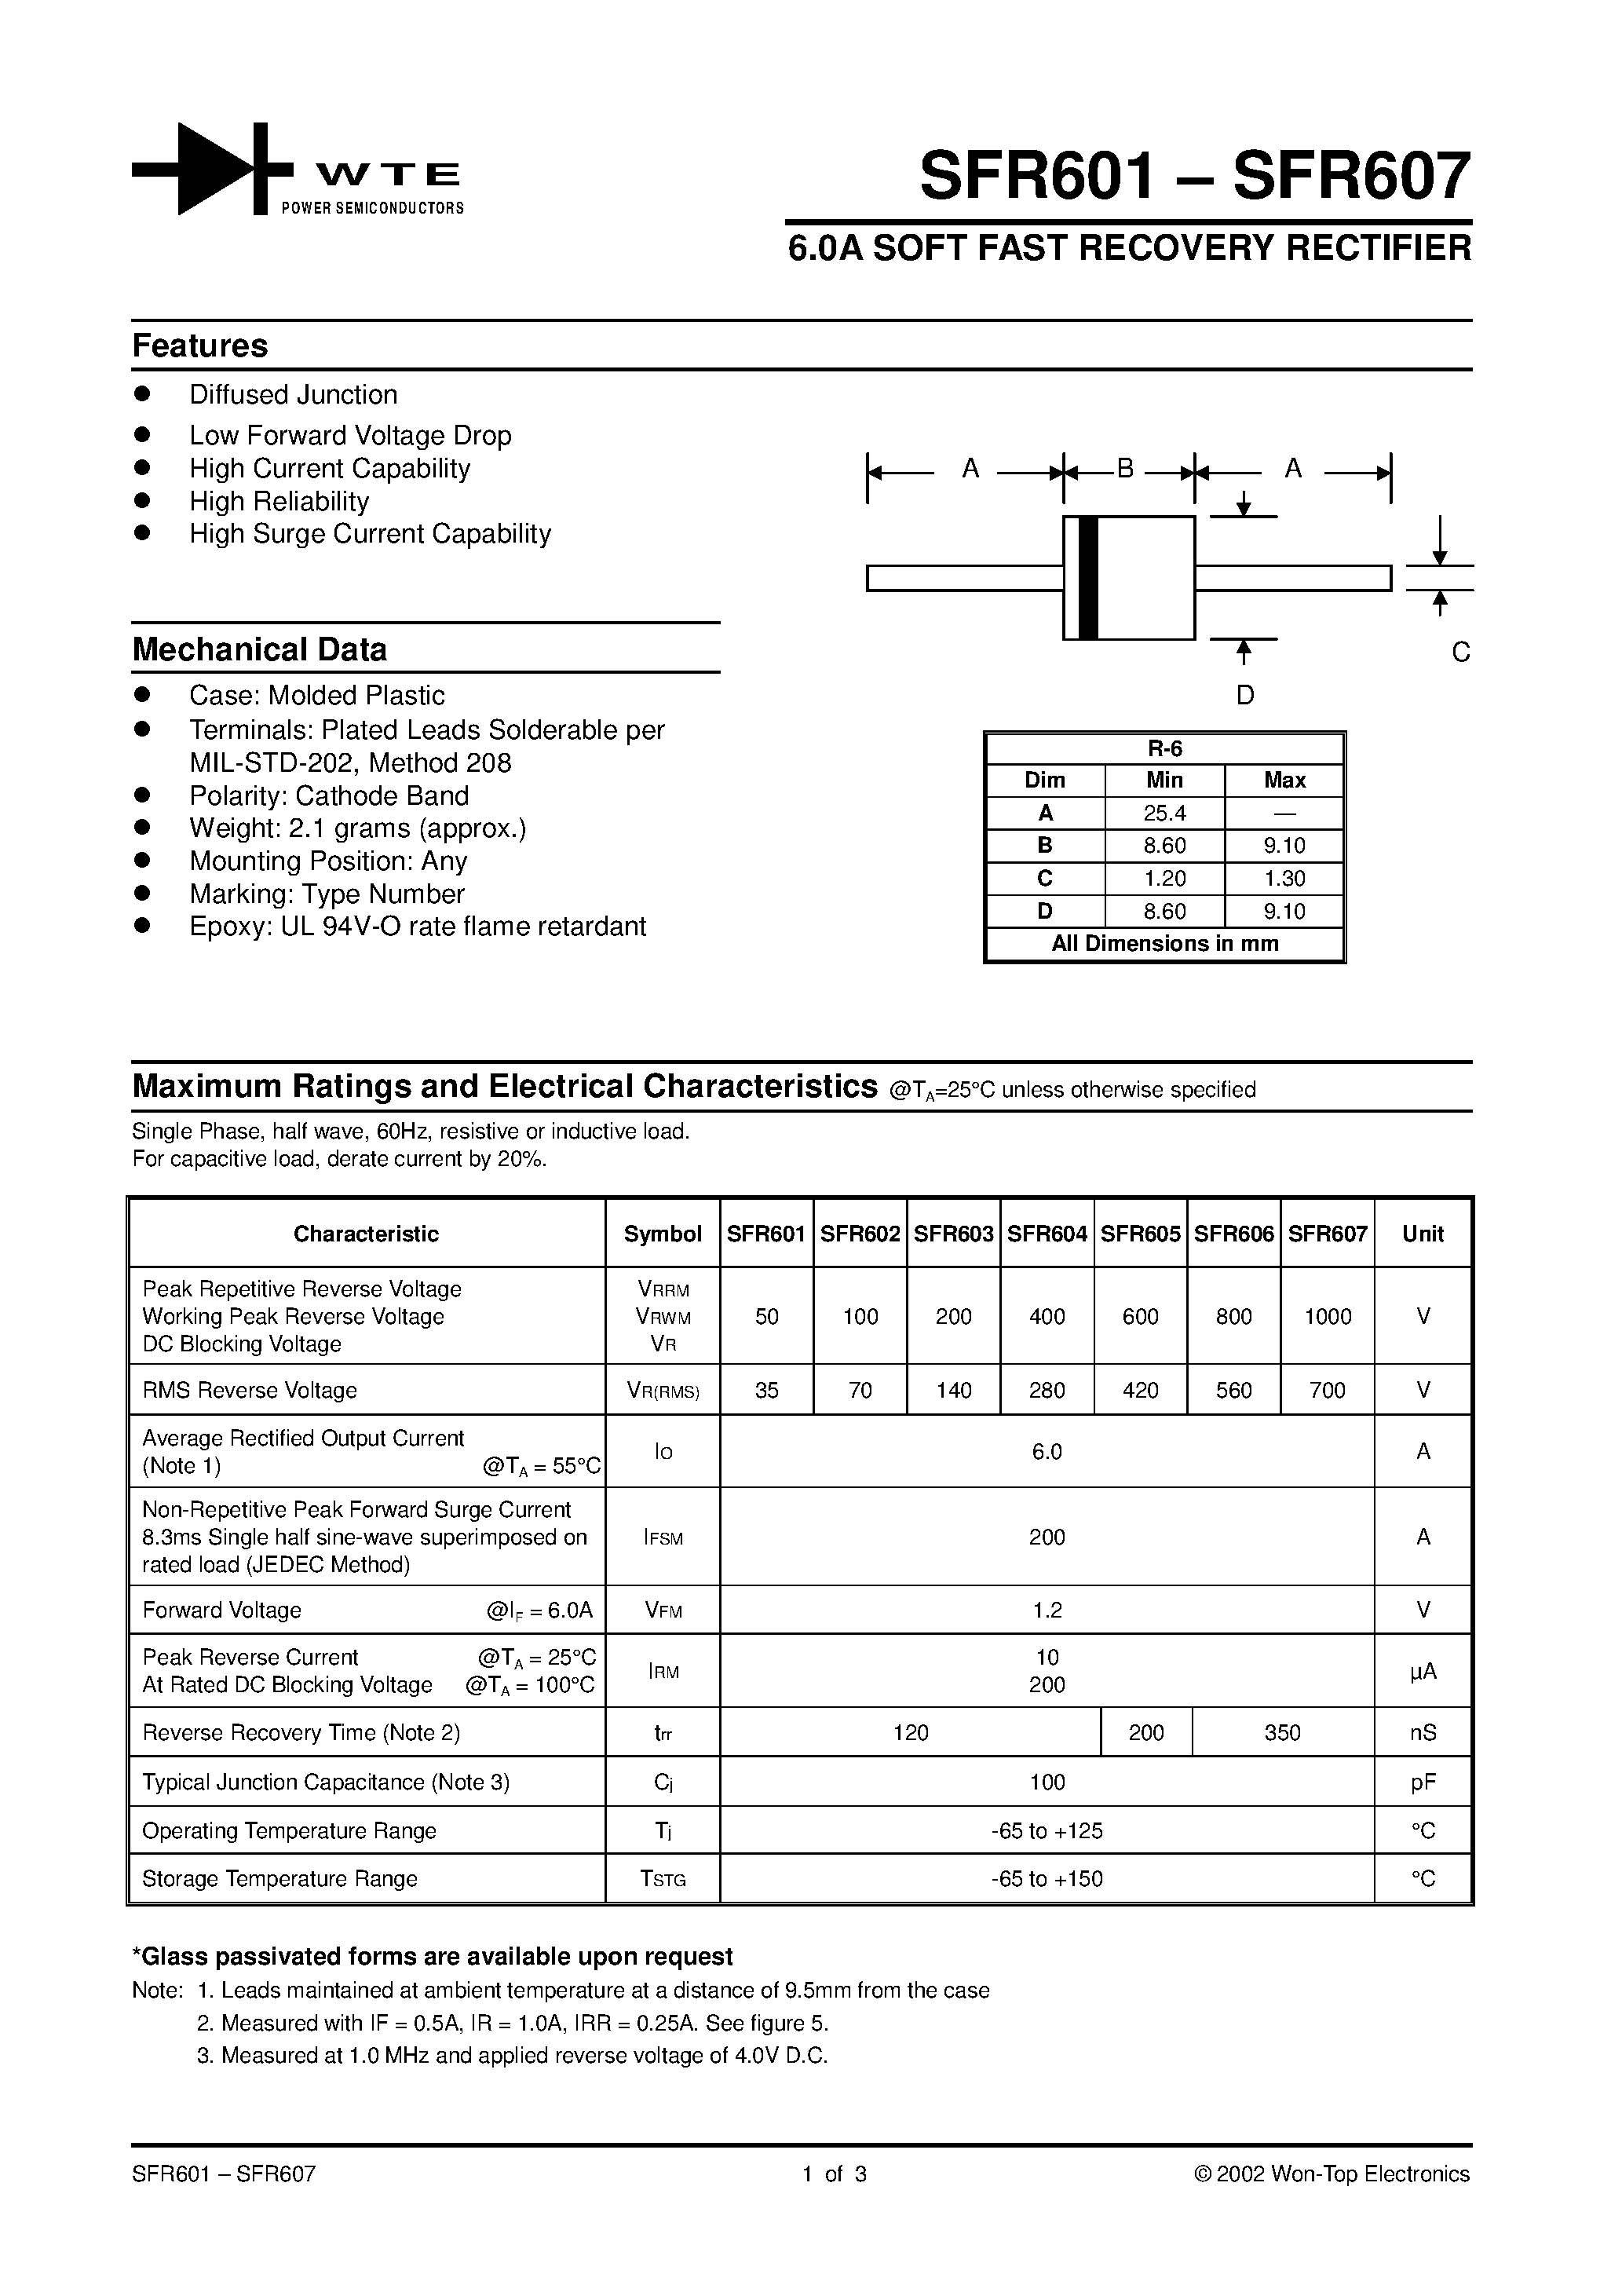 Datasheet SFR607 - 6.0A SOFT FAST RECOVERY RECTIFIER page 1